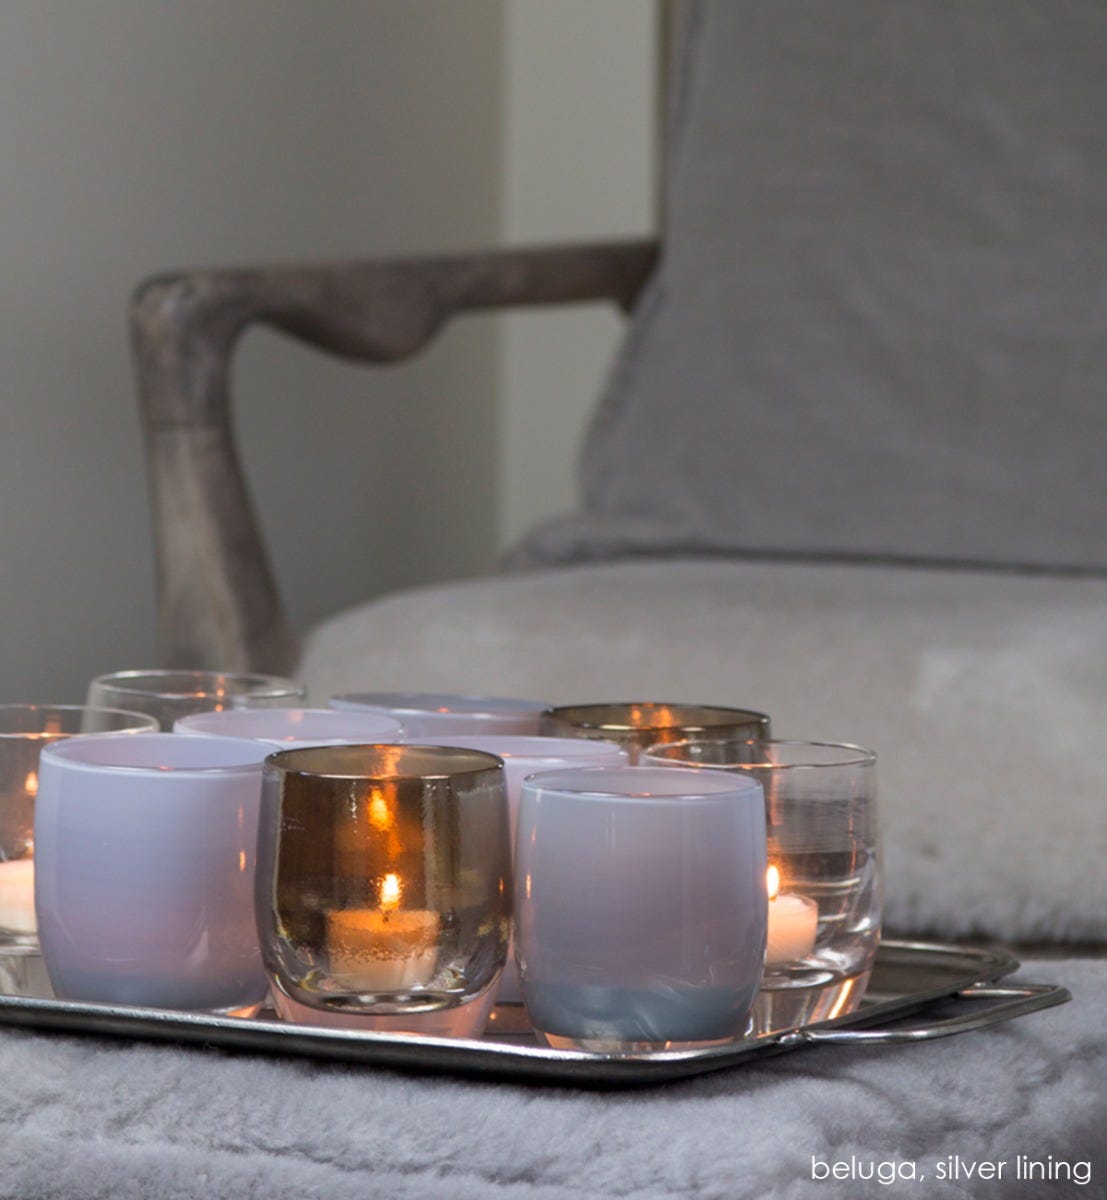 beluga light gray hand-blown glass votive candle holder. Paired with silver lining.